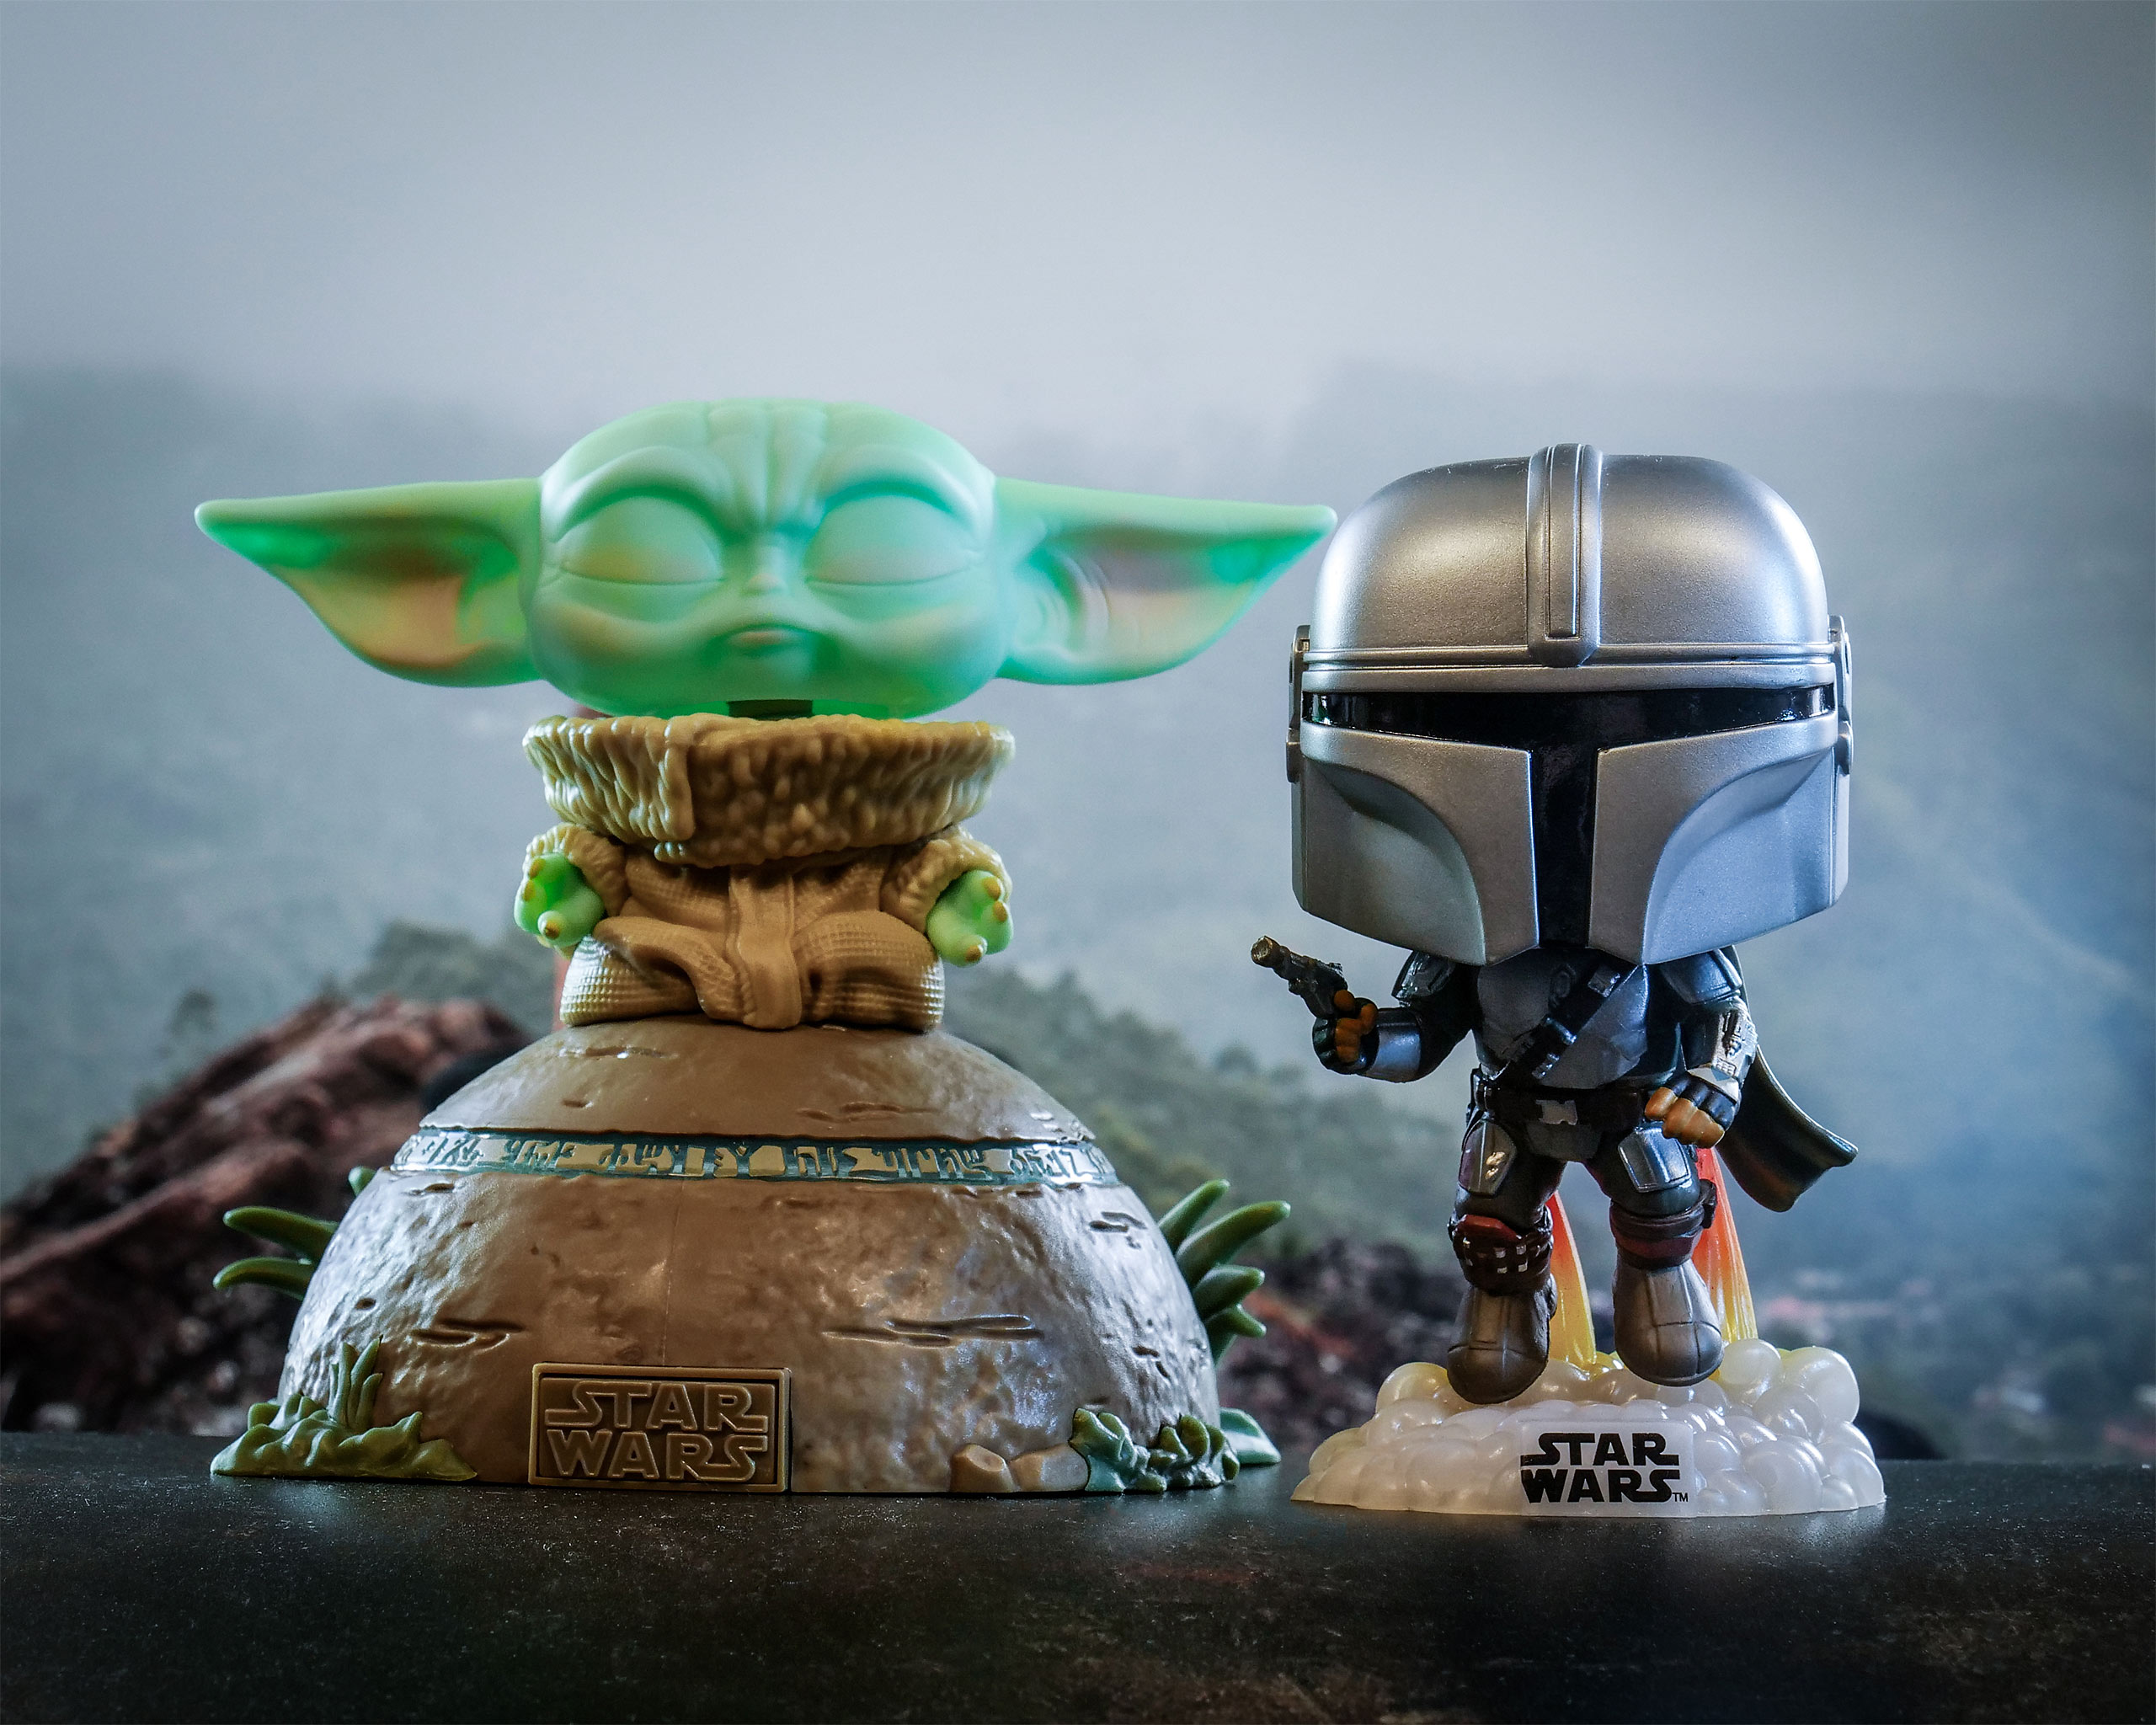 Grogu Using the Force Funko Pop Figure with Light and Sound Effects - Star Wars The Mandalorian